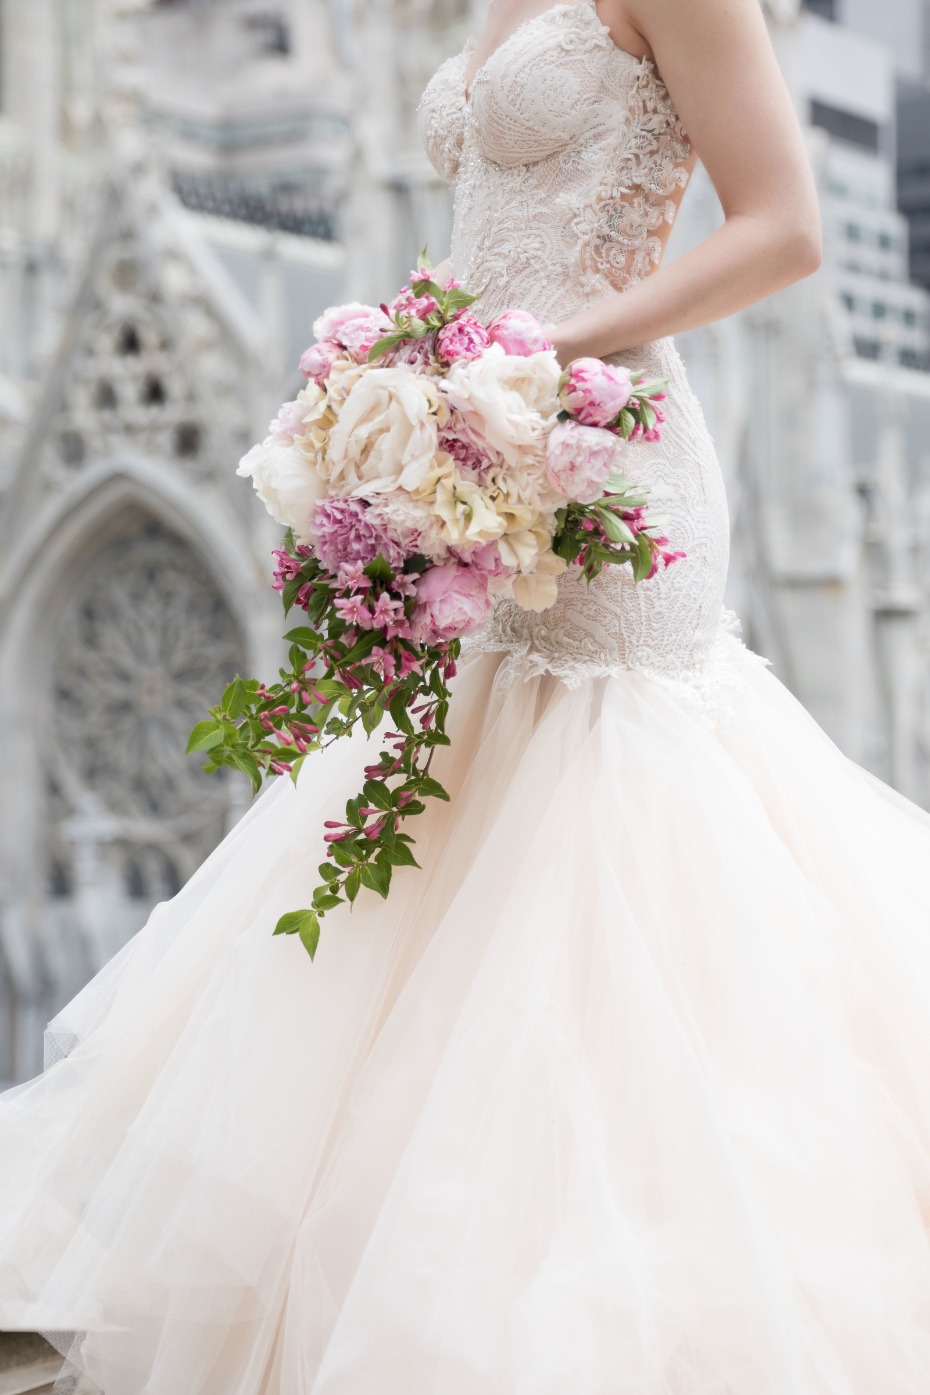 Beautiful blush and white floral bouquet